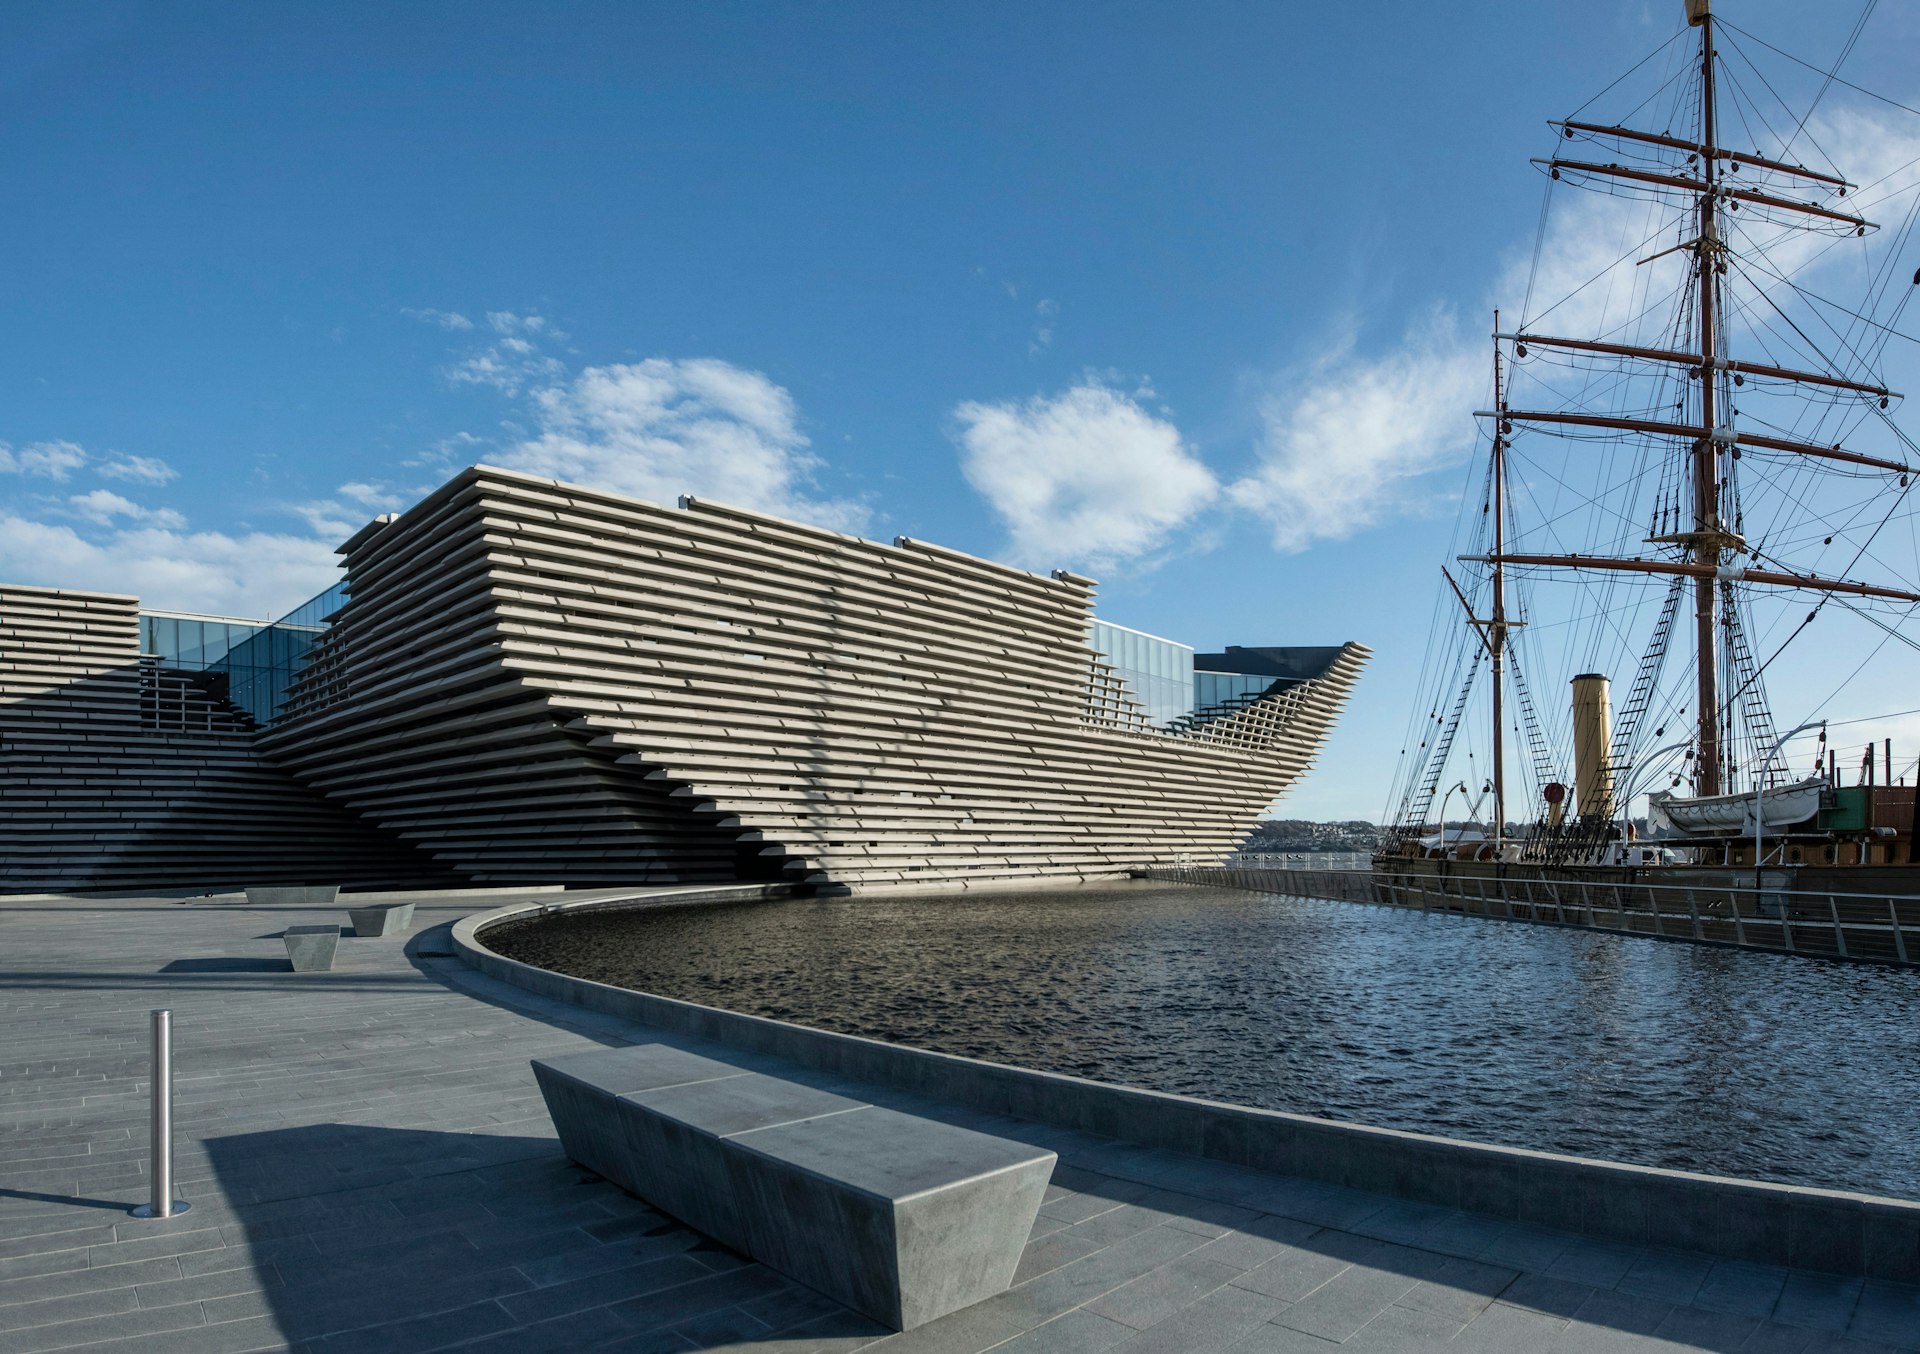 Exterior of the V&A Museum of Design in Dundee